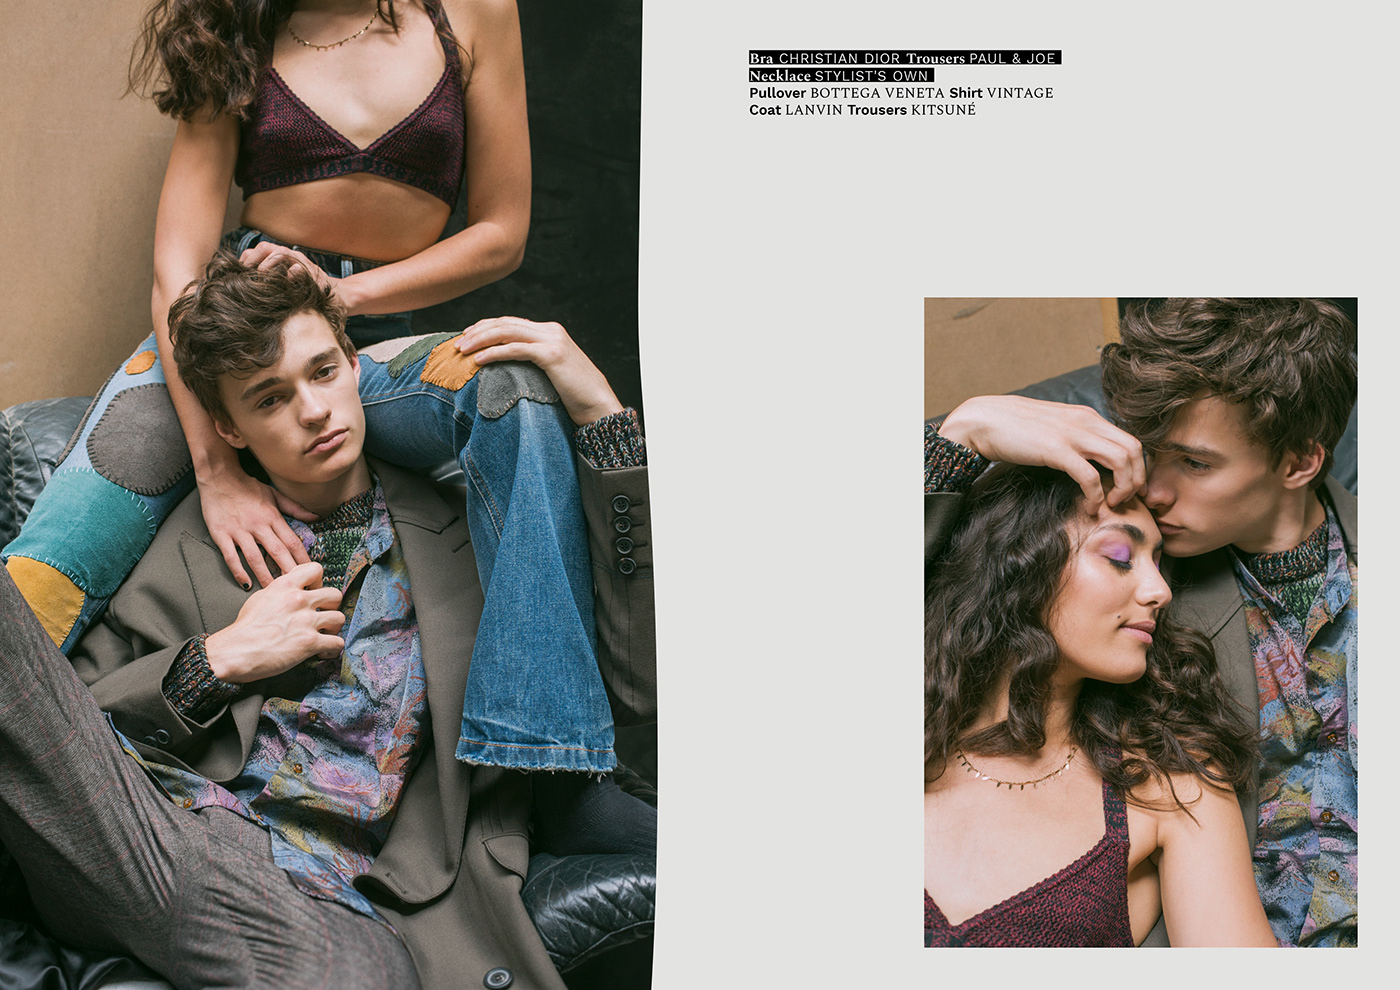 editorial Layout makeup Love couple styling  vintage LGBT pride editorial design 